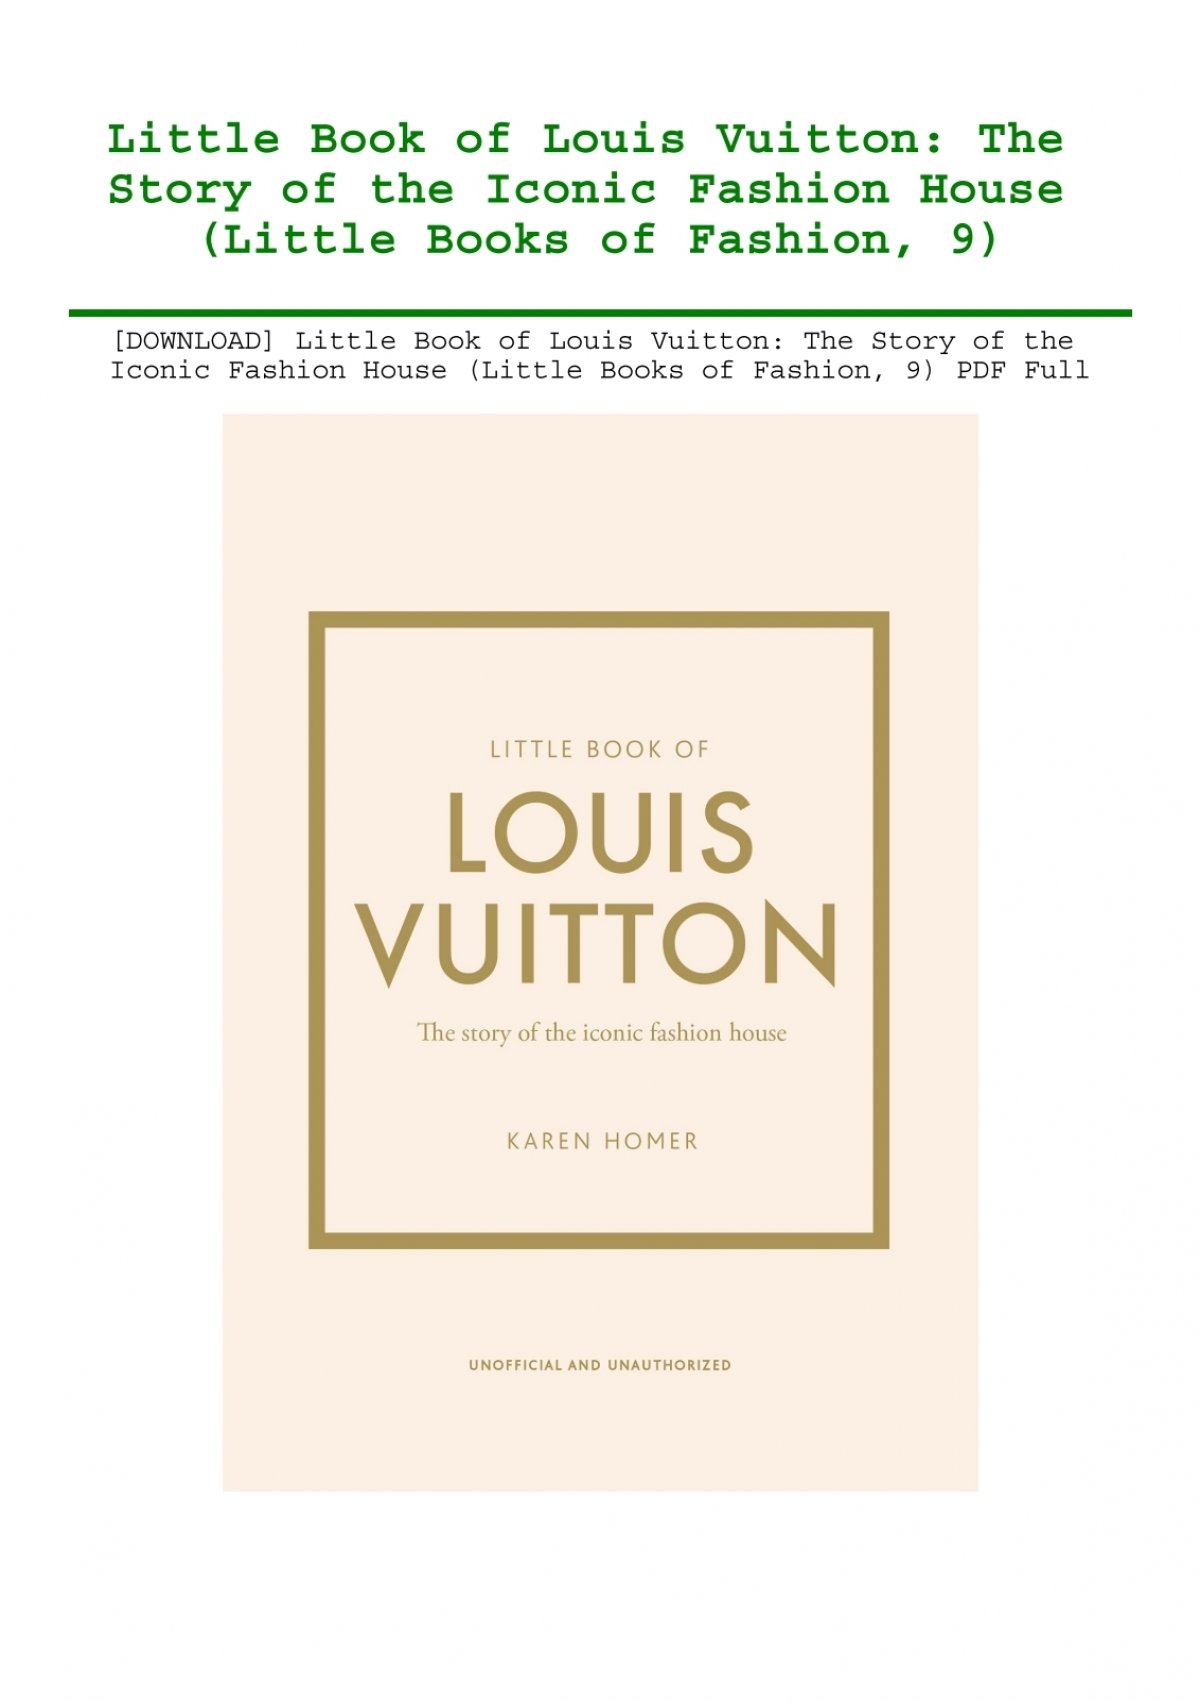 Little Books of Fashion: Little Book of Louis Vuitton: The Story